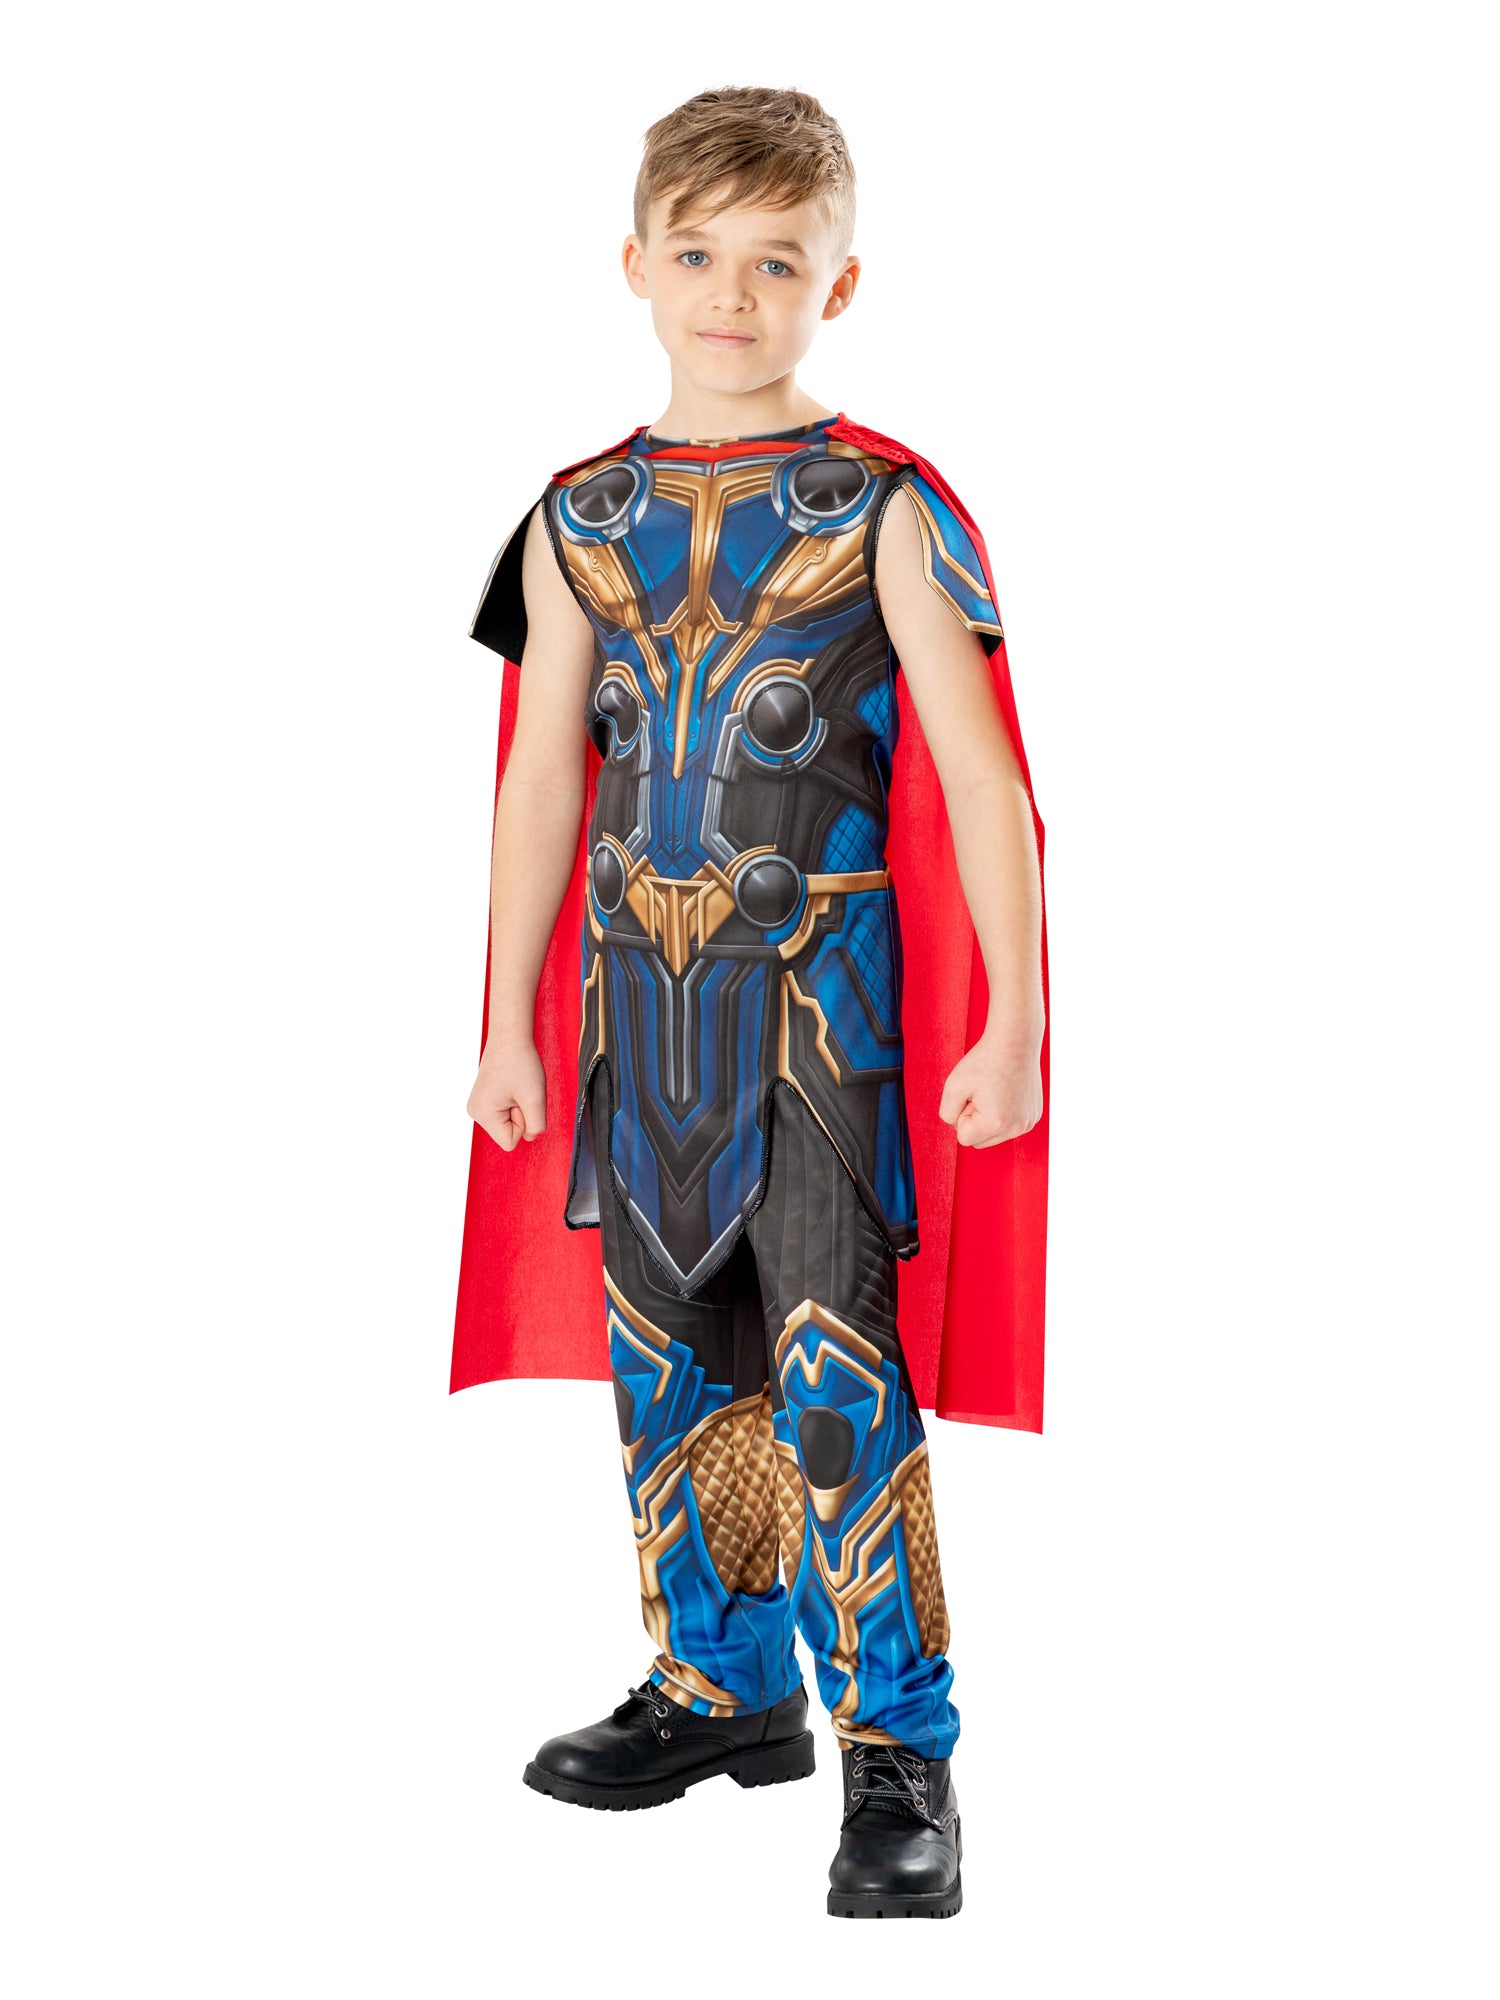 Thor, Avengers, Blue, Marvel, Kids Costumes, 3-4 years, Front